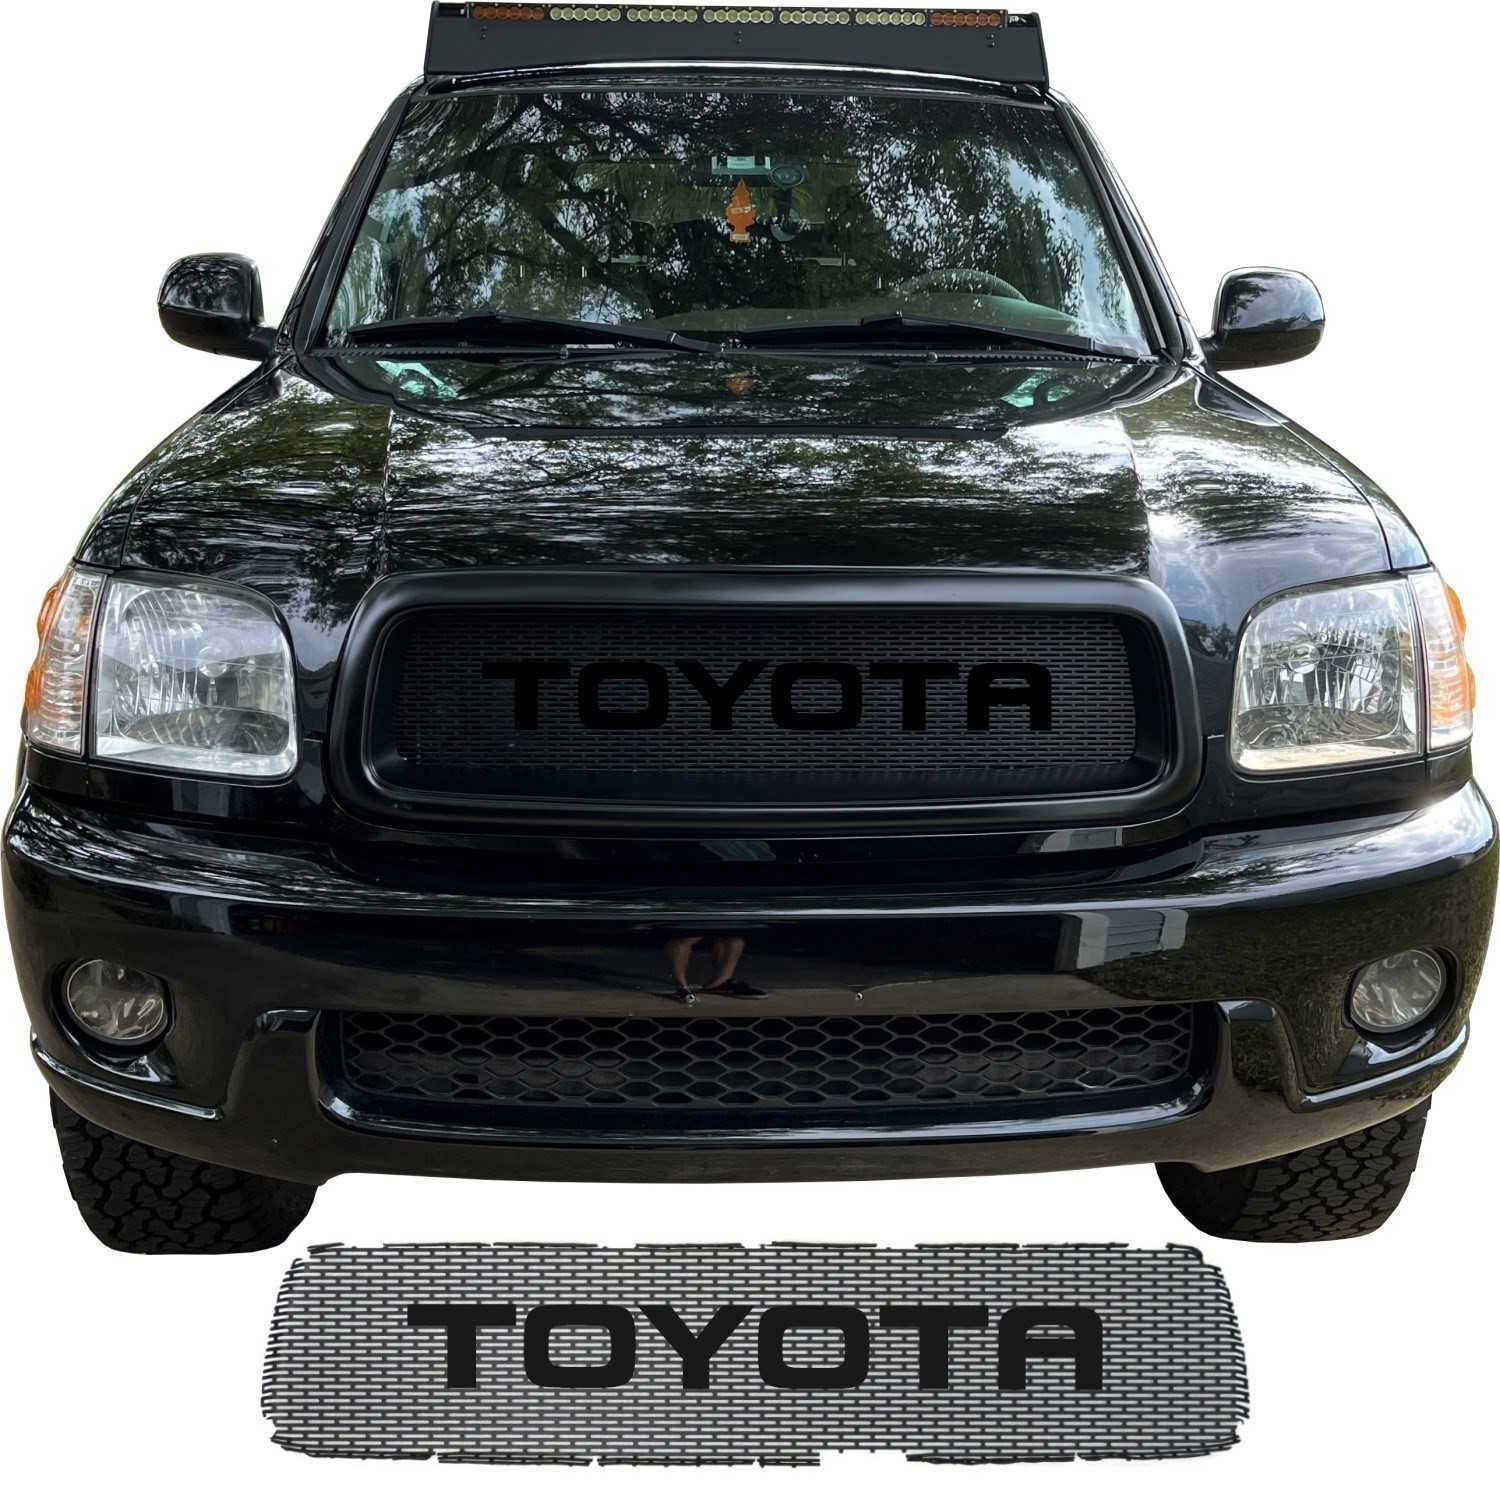 2001 - 2004 Toyota Sequoia Grill Mesh with Big Lettering #1